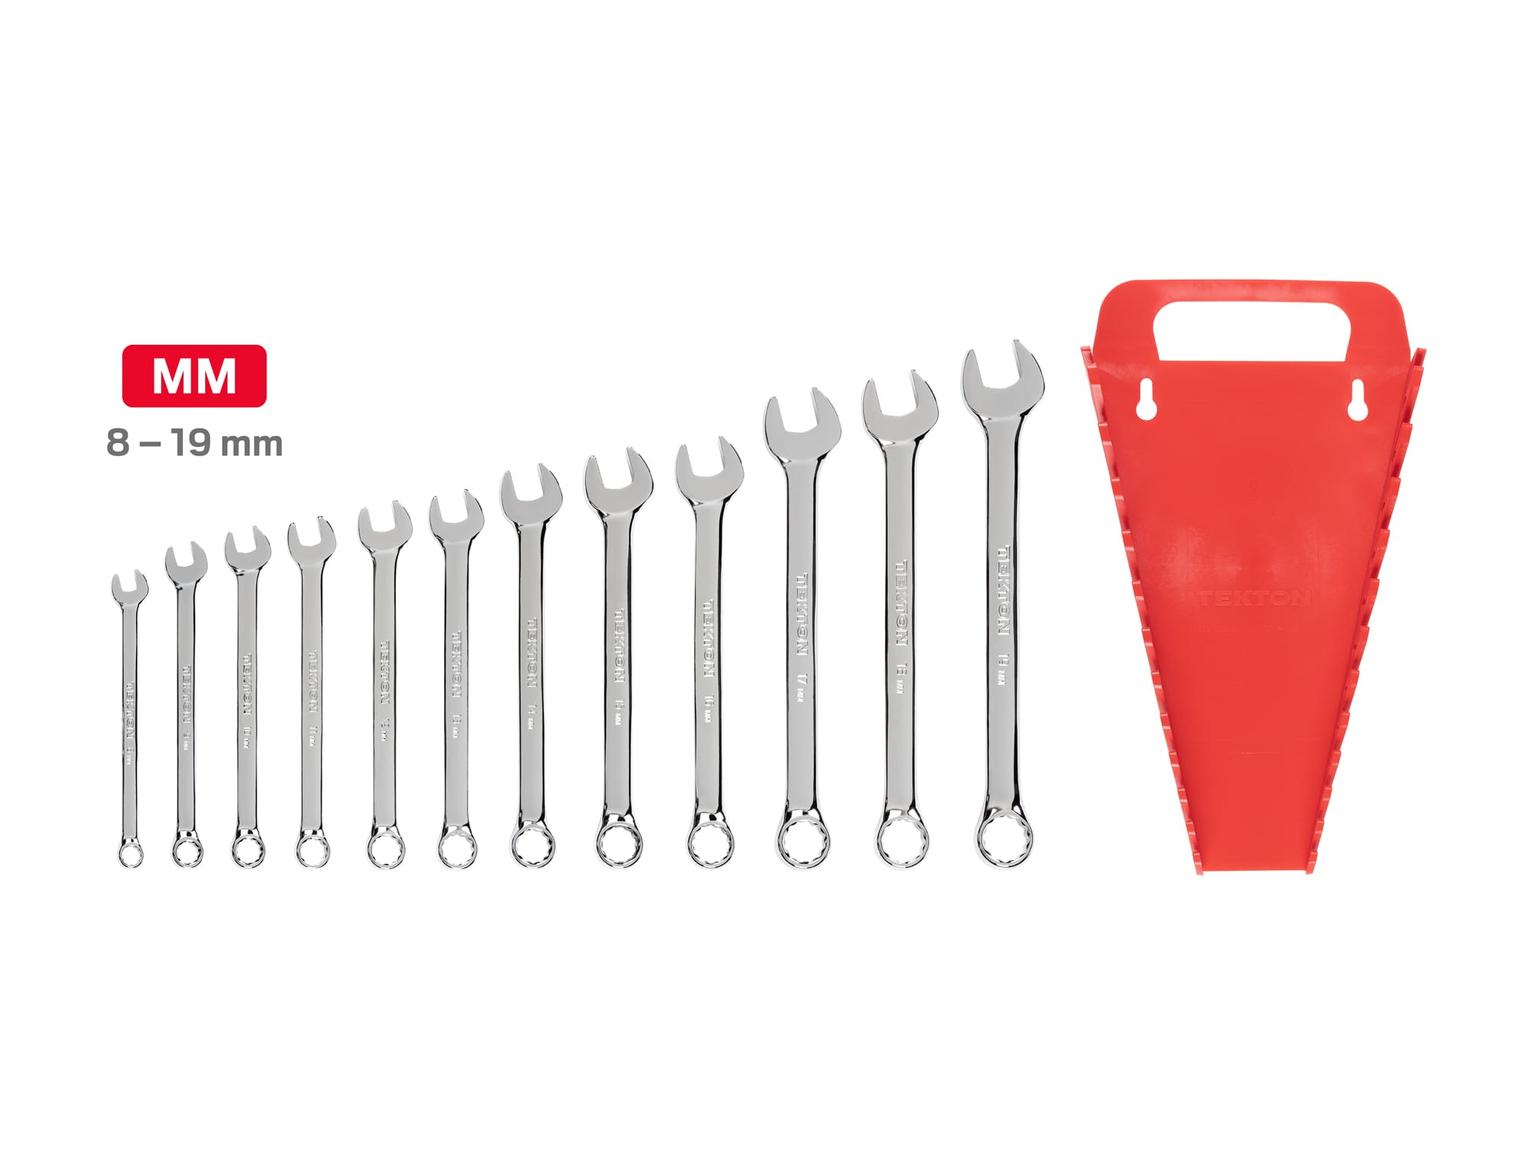 TEKTON WCB91201-T Combination Wrench Set with Holder, 12-Piece (8 - 19 mm)